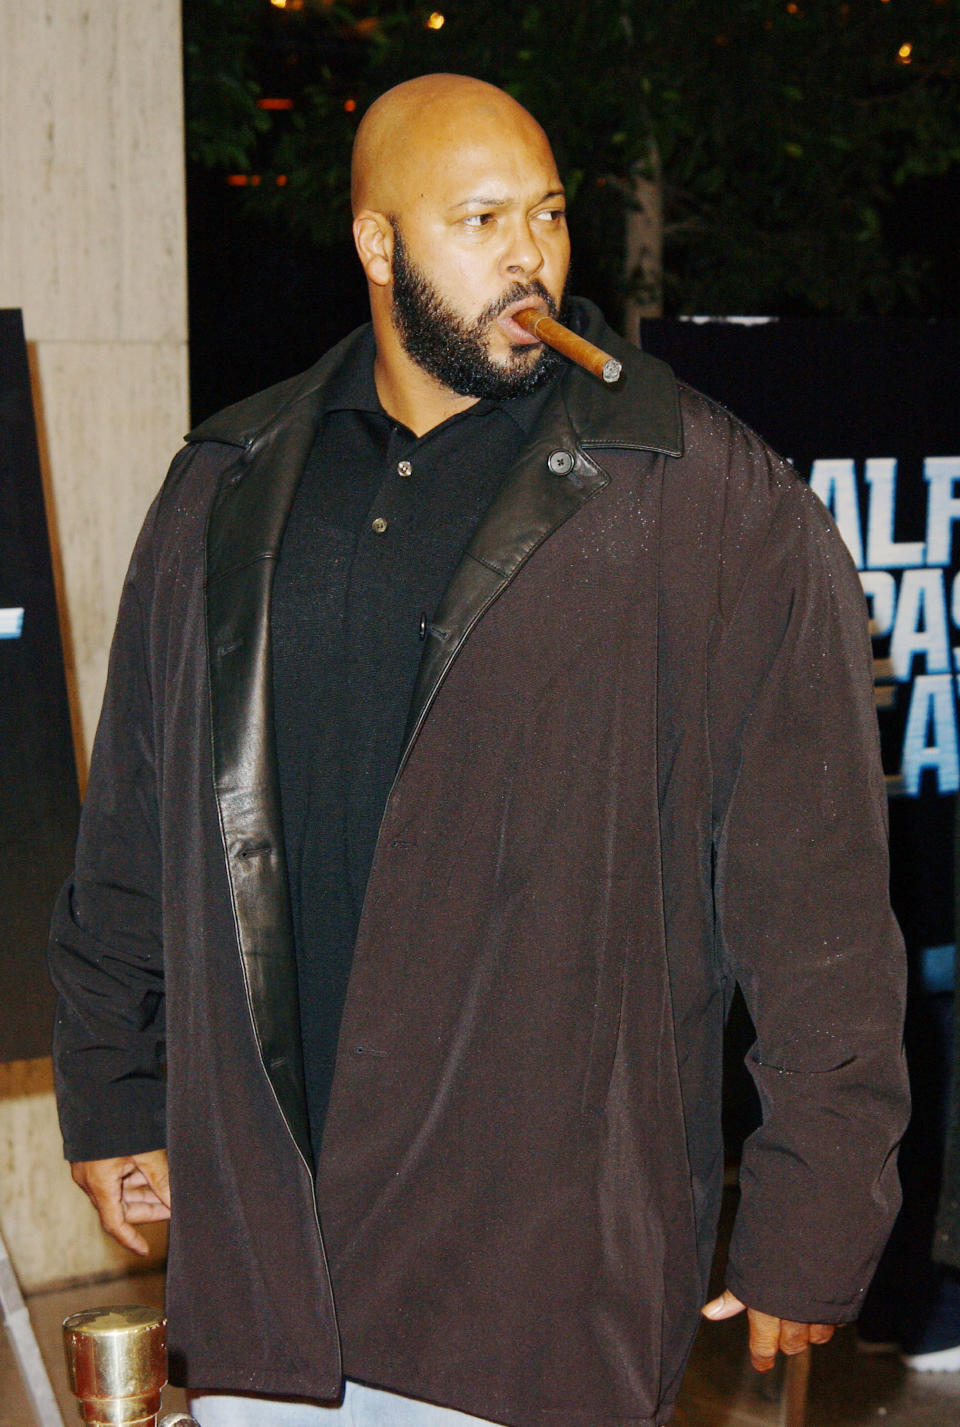 Music producer Suge Knight